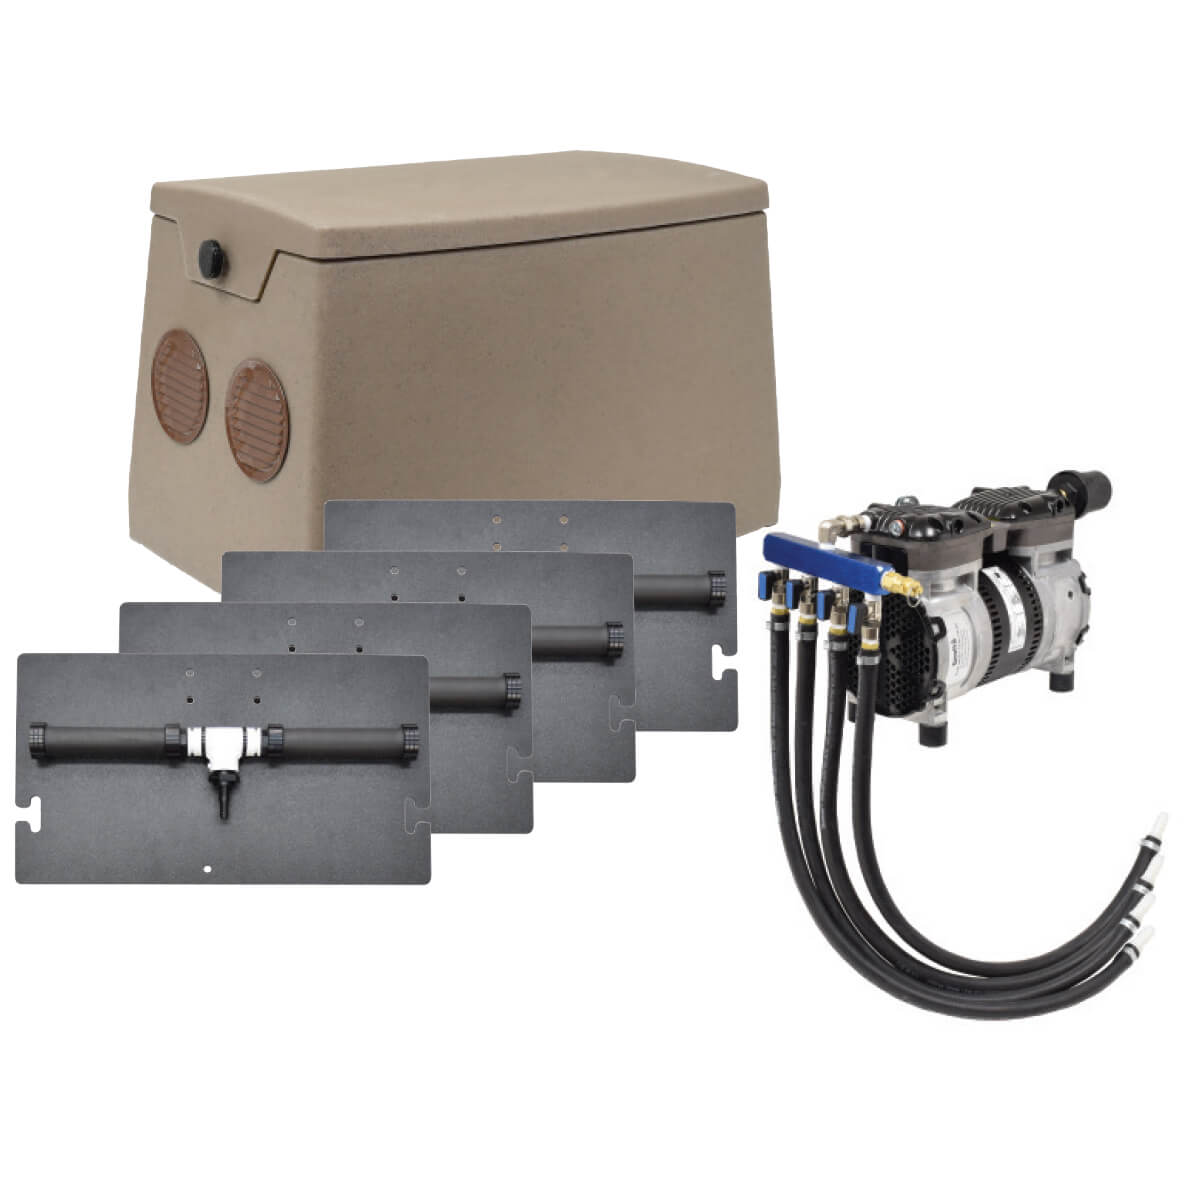 EasyPro Air De-Icing System for Docks - American Pond Supplies Easy Pro DKSW60 - Docks Up to 60 feet De-Icer De-Icer